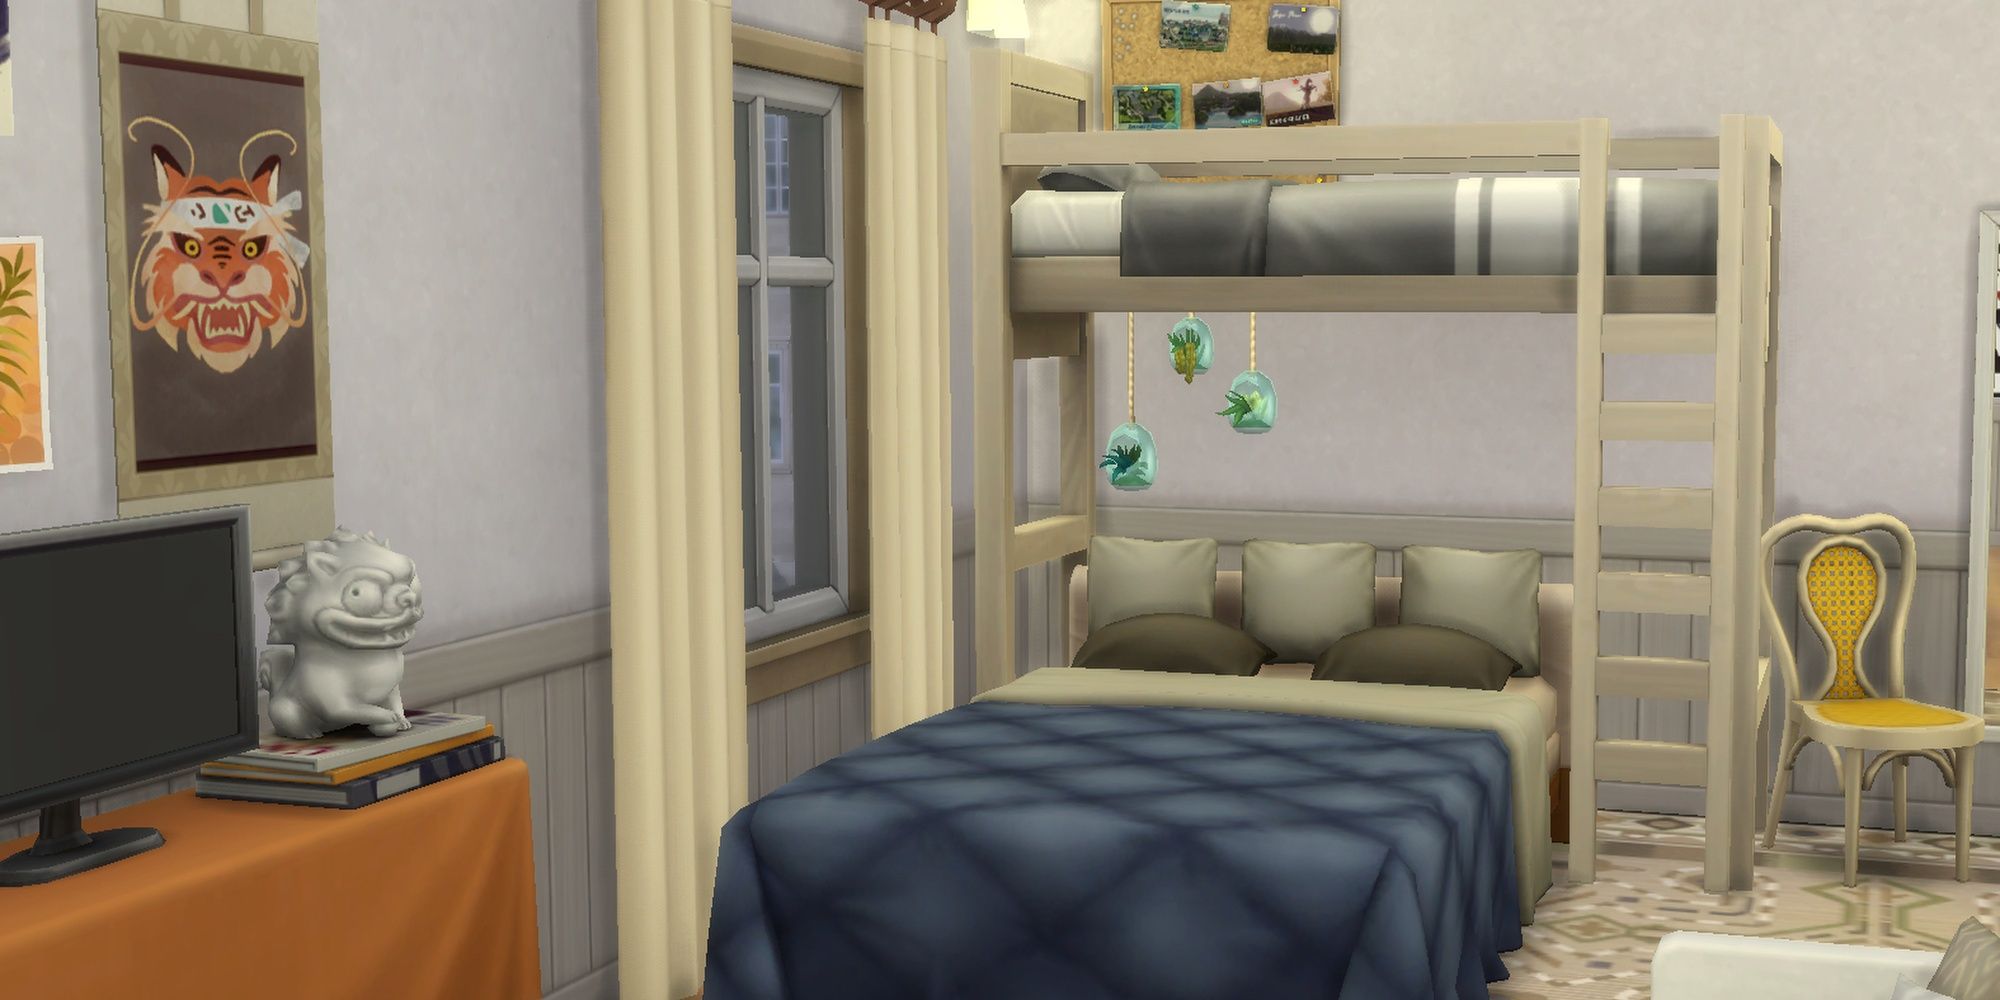 A lofted bed stationed over a large quilted bed in what looks like a Sims 4 dormitory.